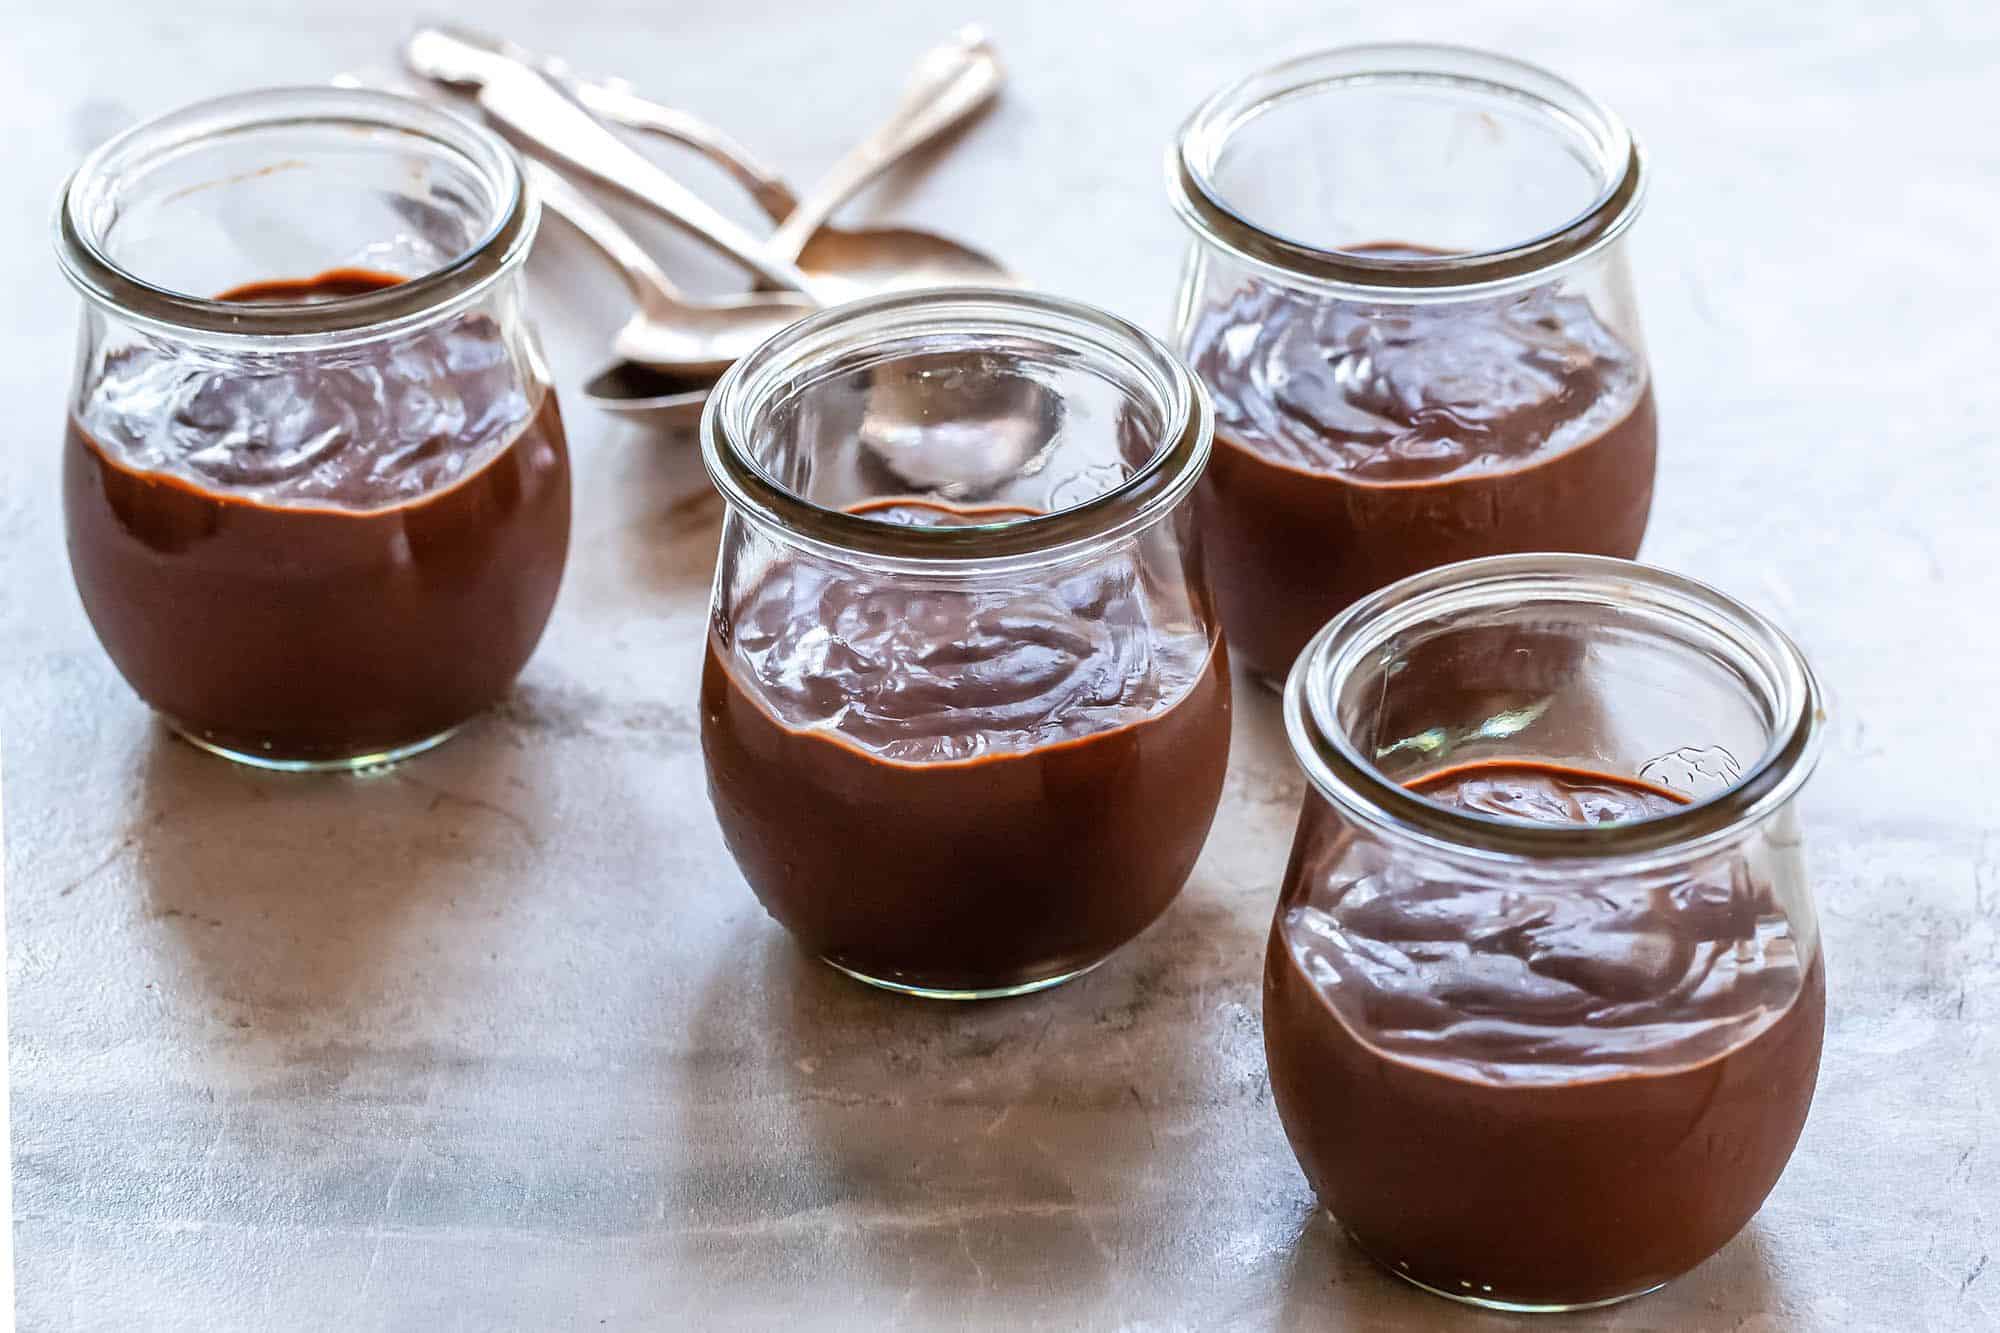 TrendMantra Chocolate-Pudding-LEAD-6-14e83a9a52b94f1e93b9c67daea09c32 Complete List Of Popular Must Have Food Places In Delhi! This Needs To Be Saved & Shared 